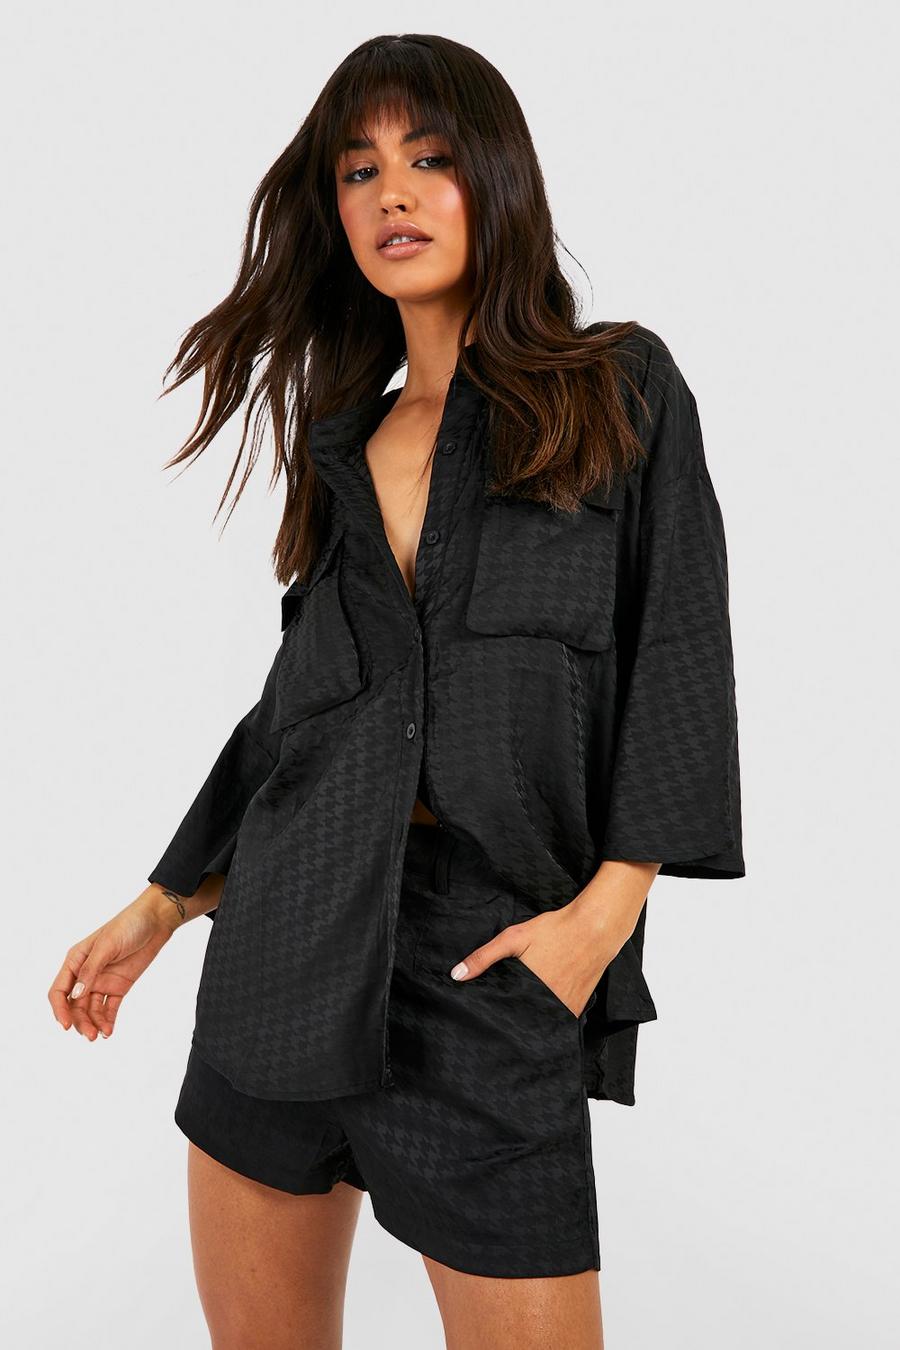 Black Dogtooth Satin Pocket Detail Relaxed Fit Shirt 